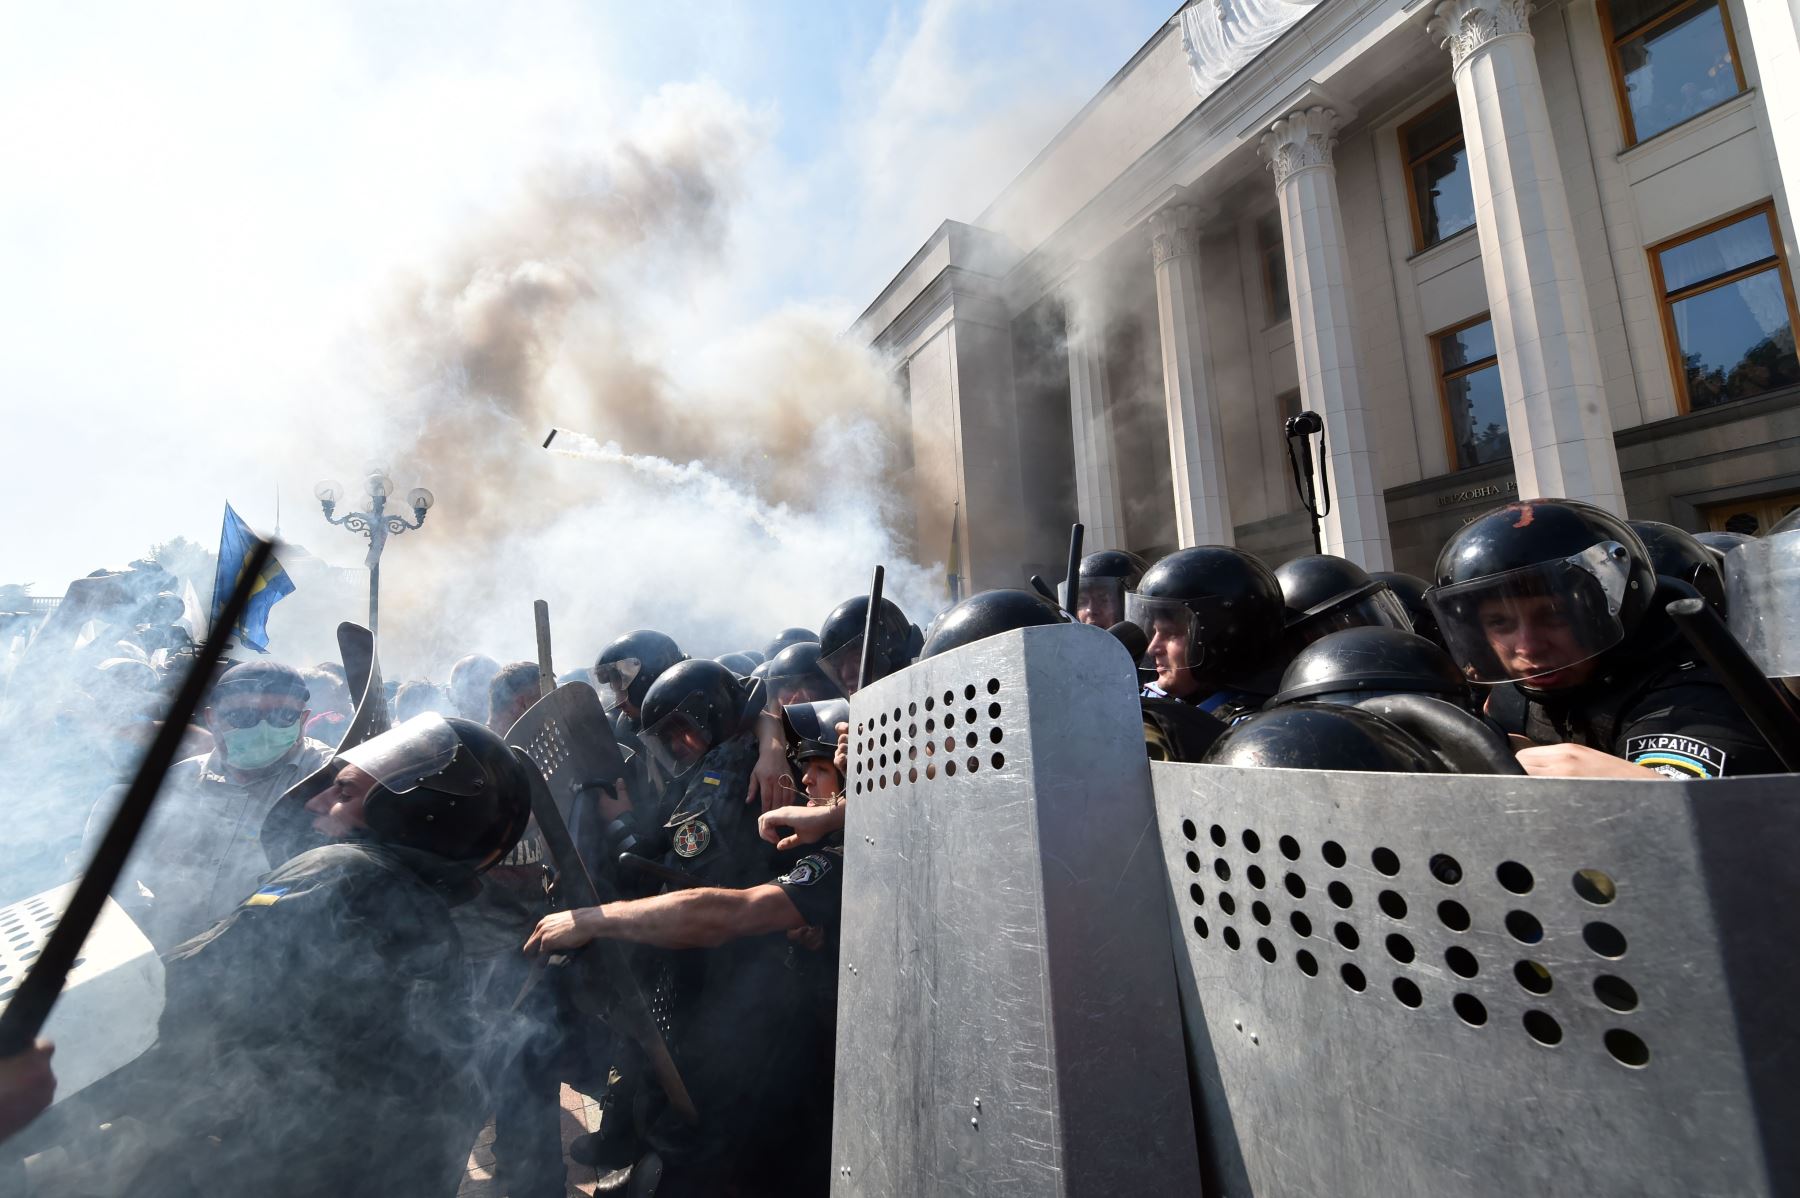 Smoke rises from the parliament building in Kiev as activists from radical Ukrainian parties, including the nationalist Svoboda, clash with police [photo credit: AFP]